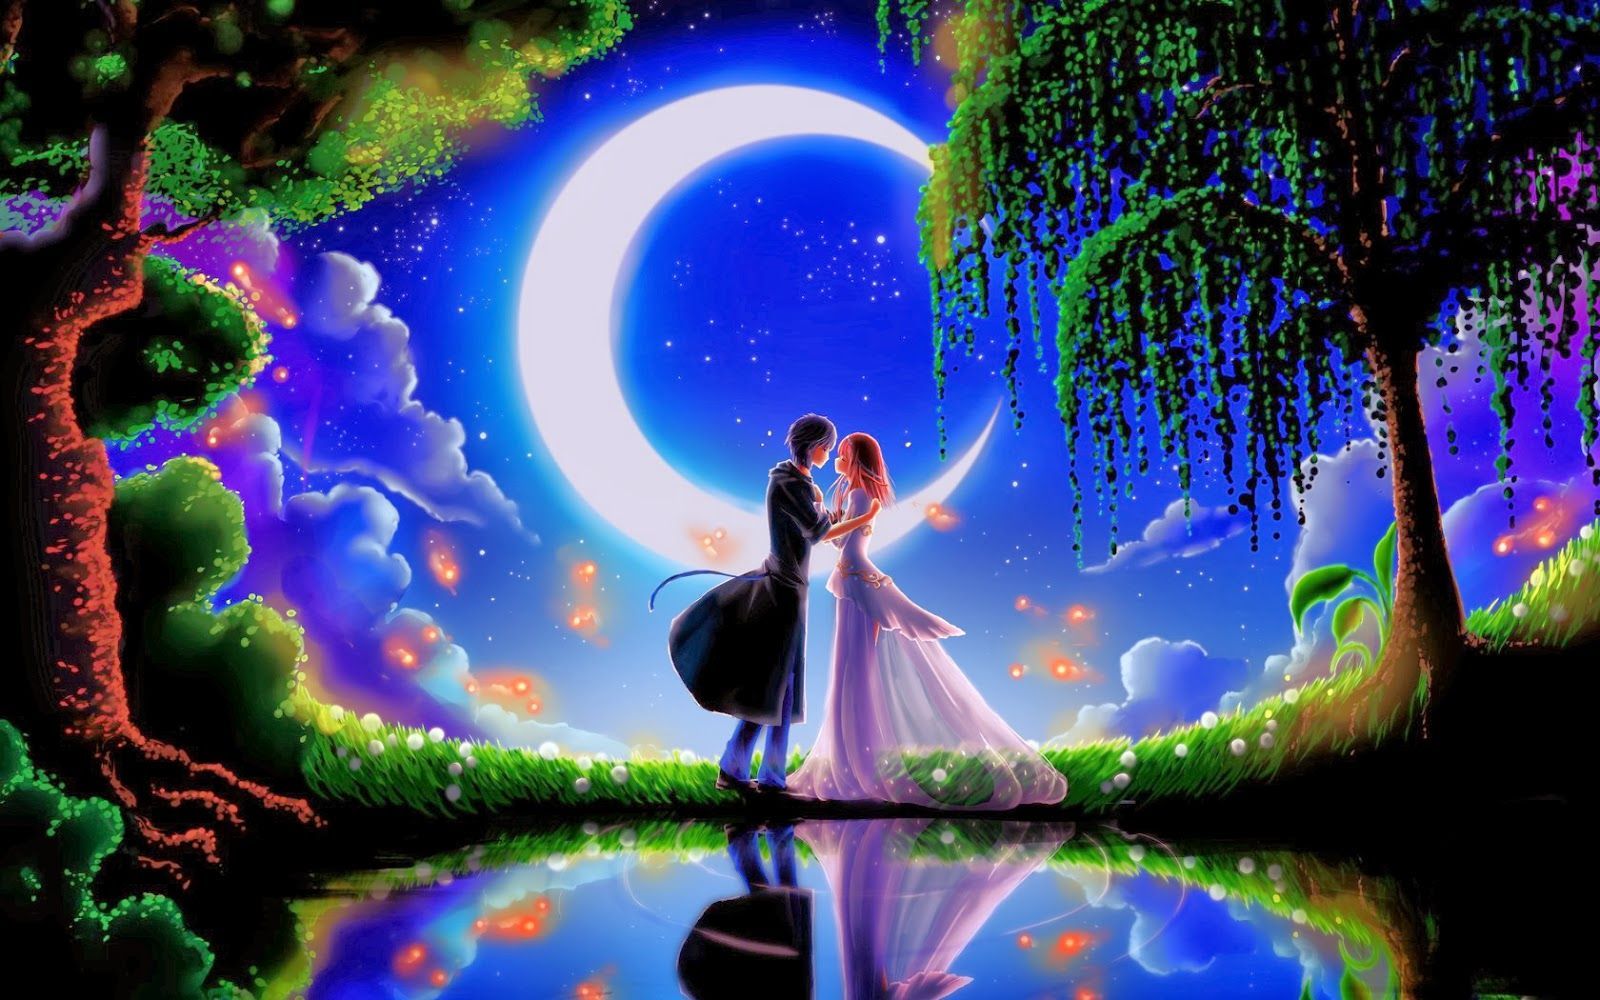 Love Beautiful Moon Images Wallpapers